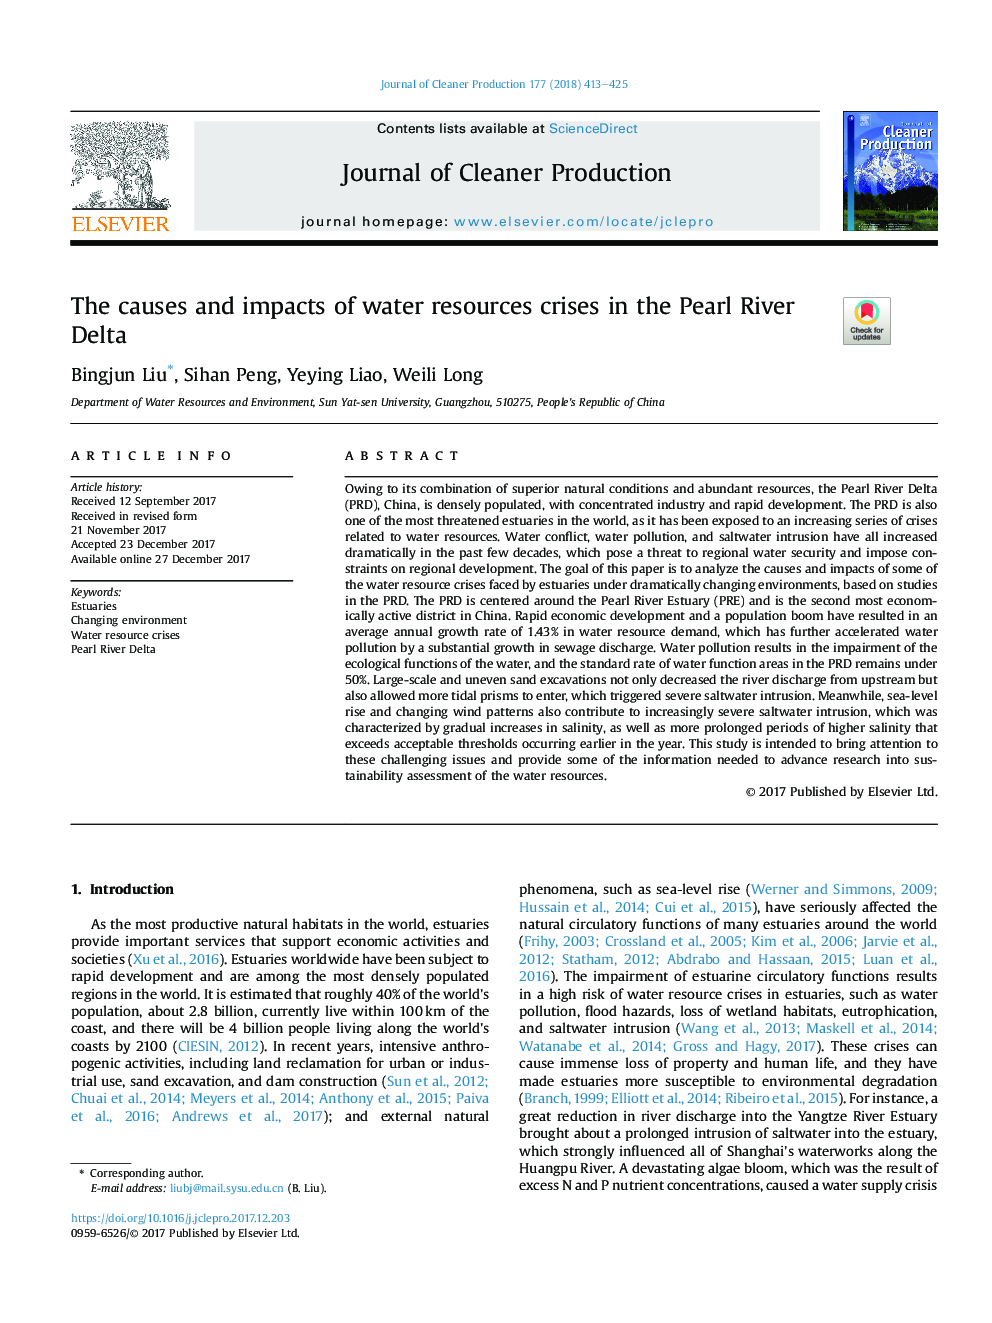 The causes and impacts of water resources crises in the Pearl River Delta